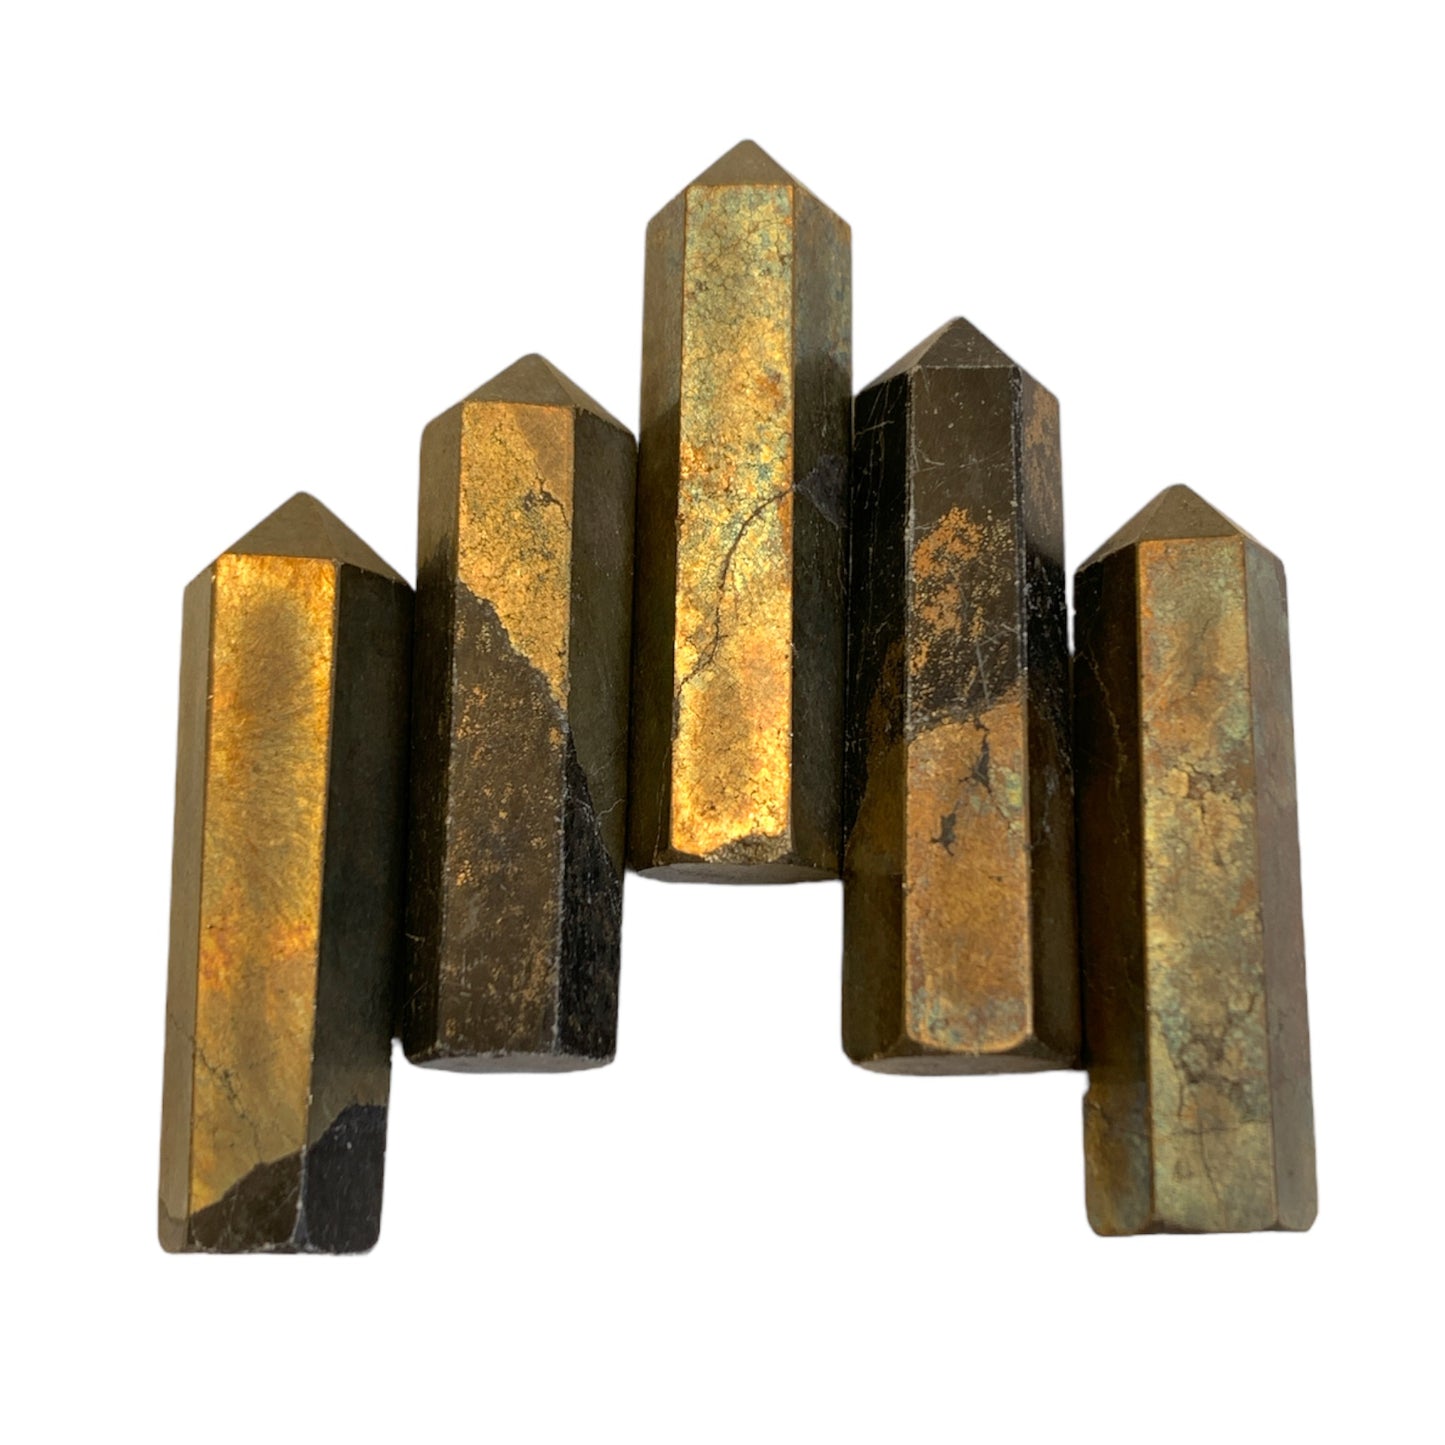 Golden Pyrite - 25-35mm - Single Terminated Pencils -  (retail purchase as singles, wholesale min order 5) - NEW1020